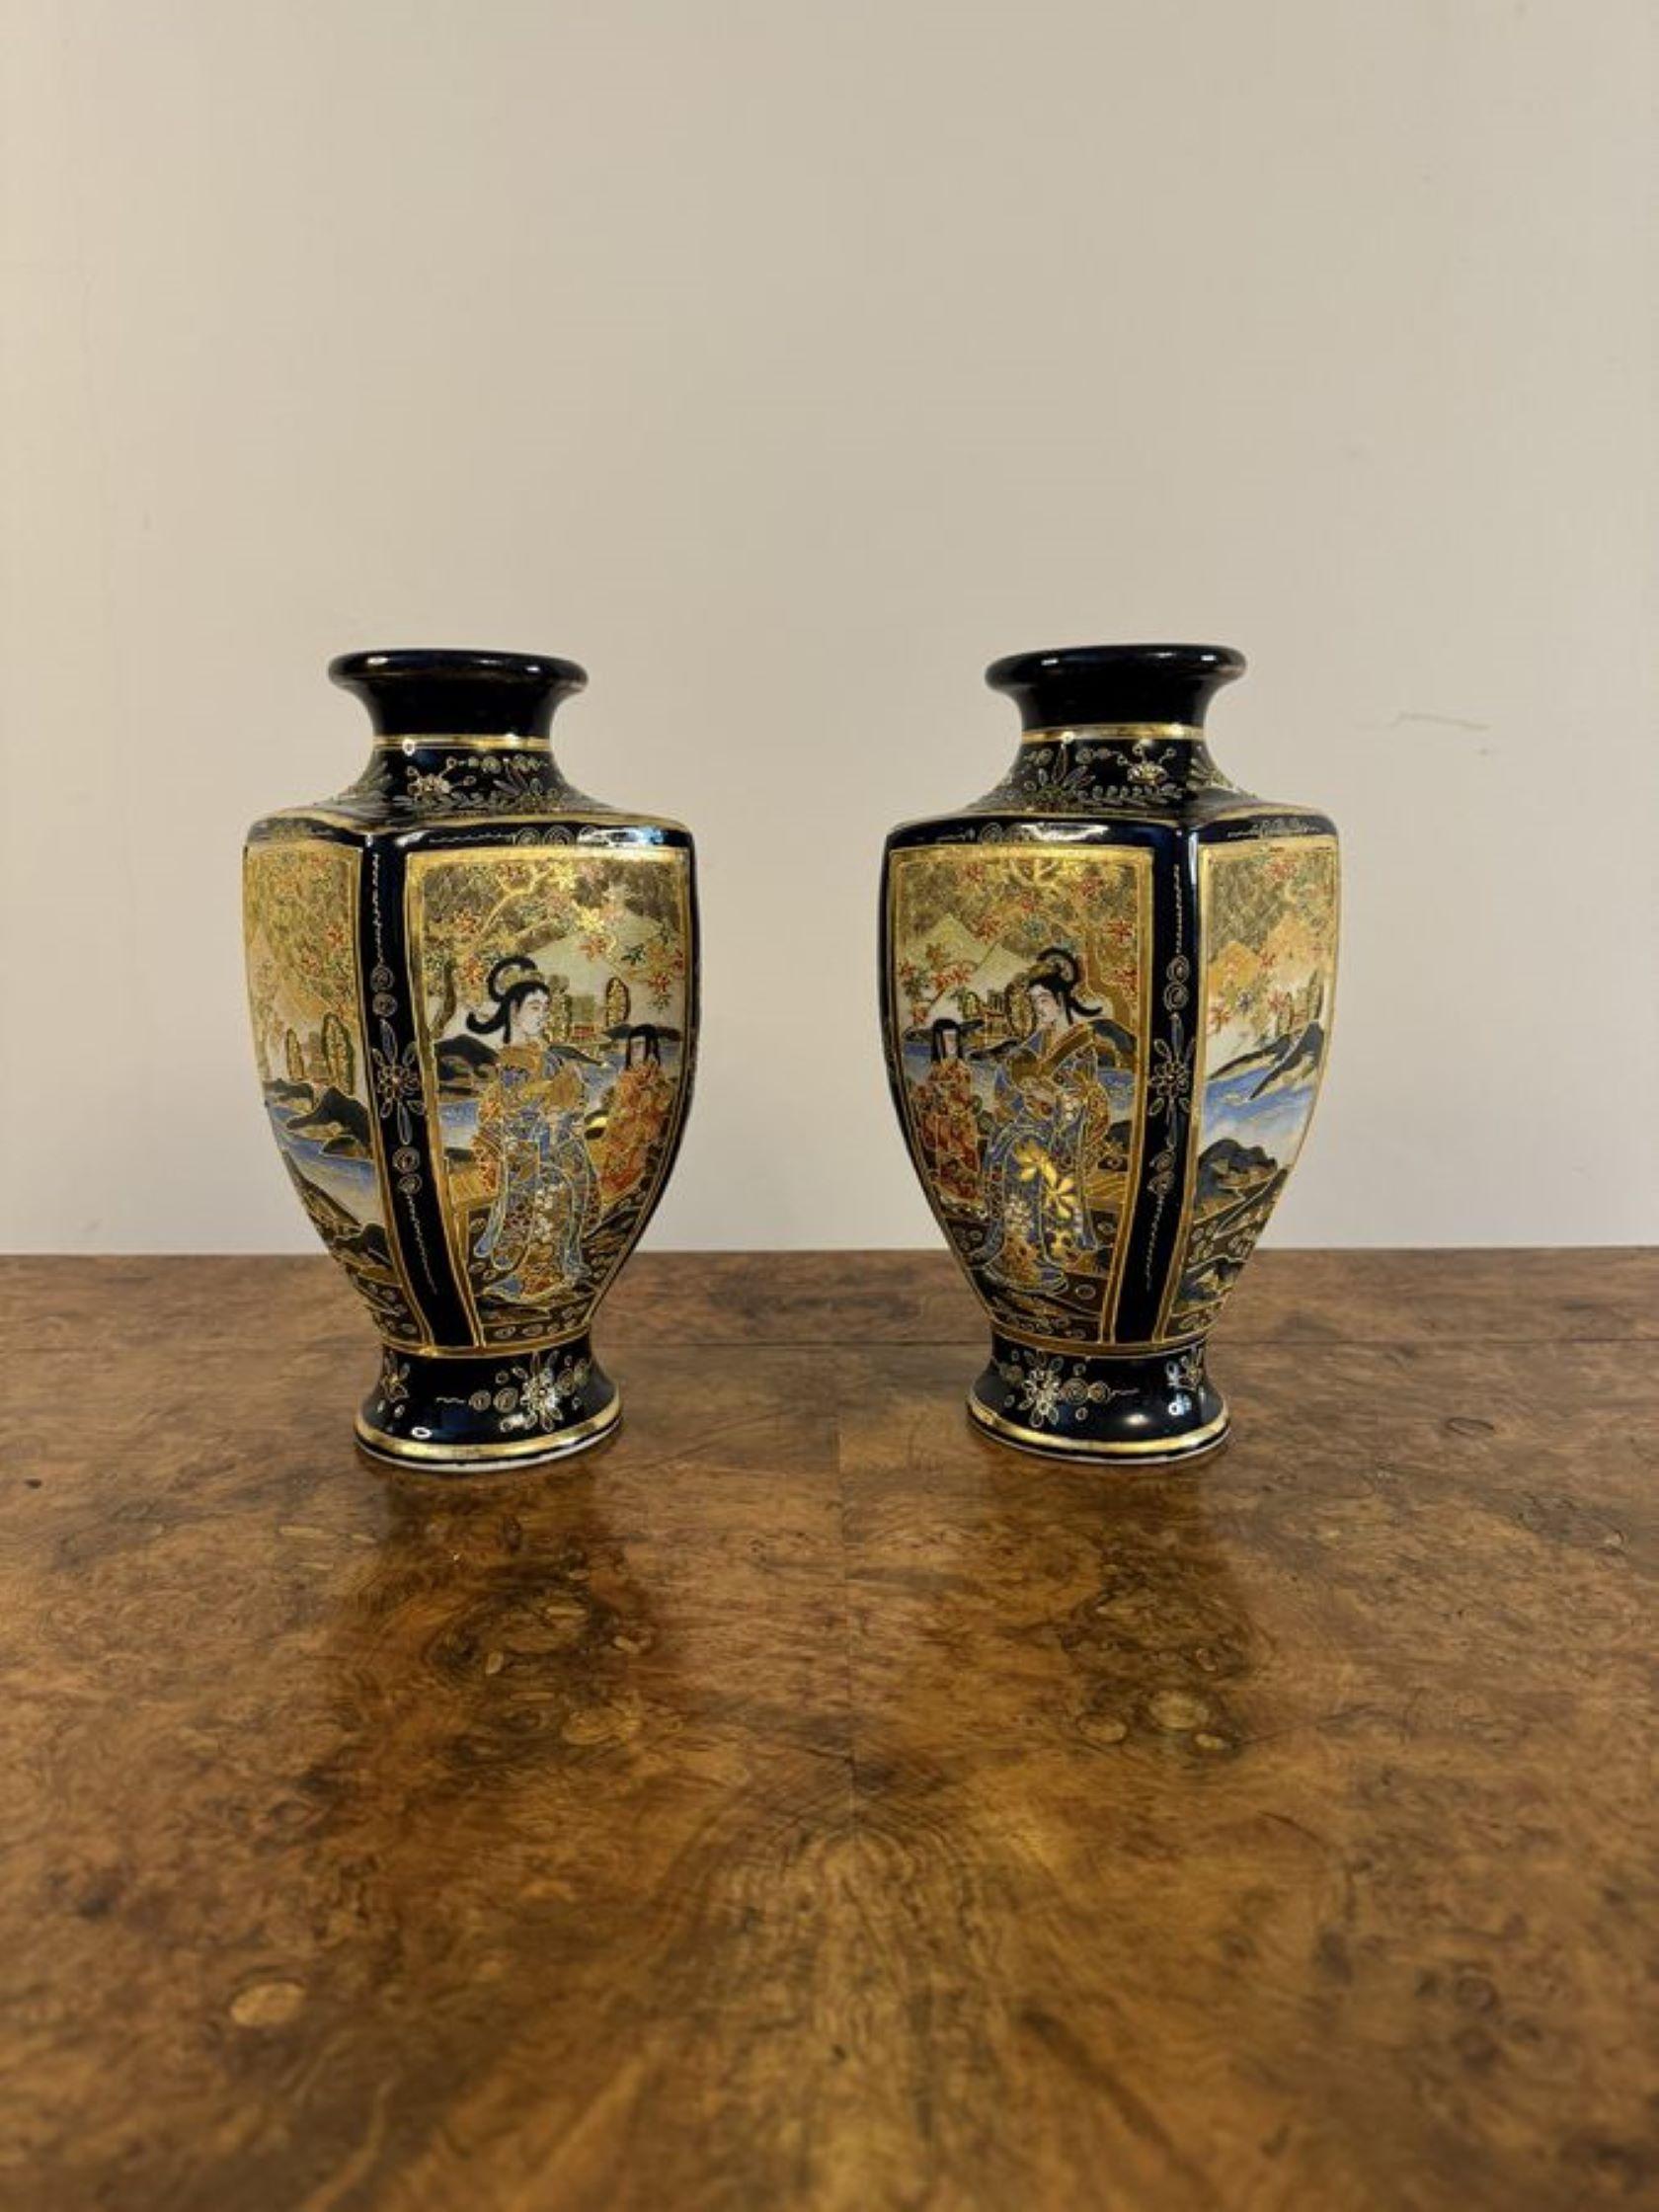 Outstanding quality pair of antique Japanese satsuma vases having a quality pair of shaped Japanese Satsuma vases with gilded circular shaped tops, with fantastic detailed hand painted decoration of figural and landscape scenes within blue and gold